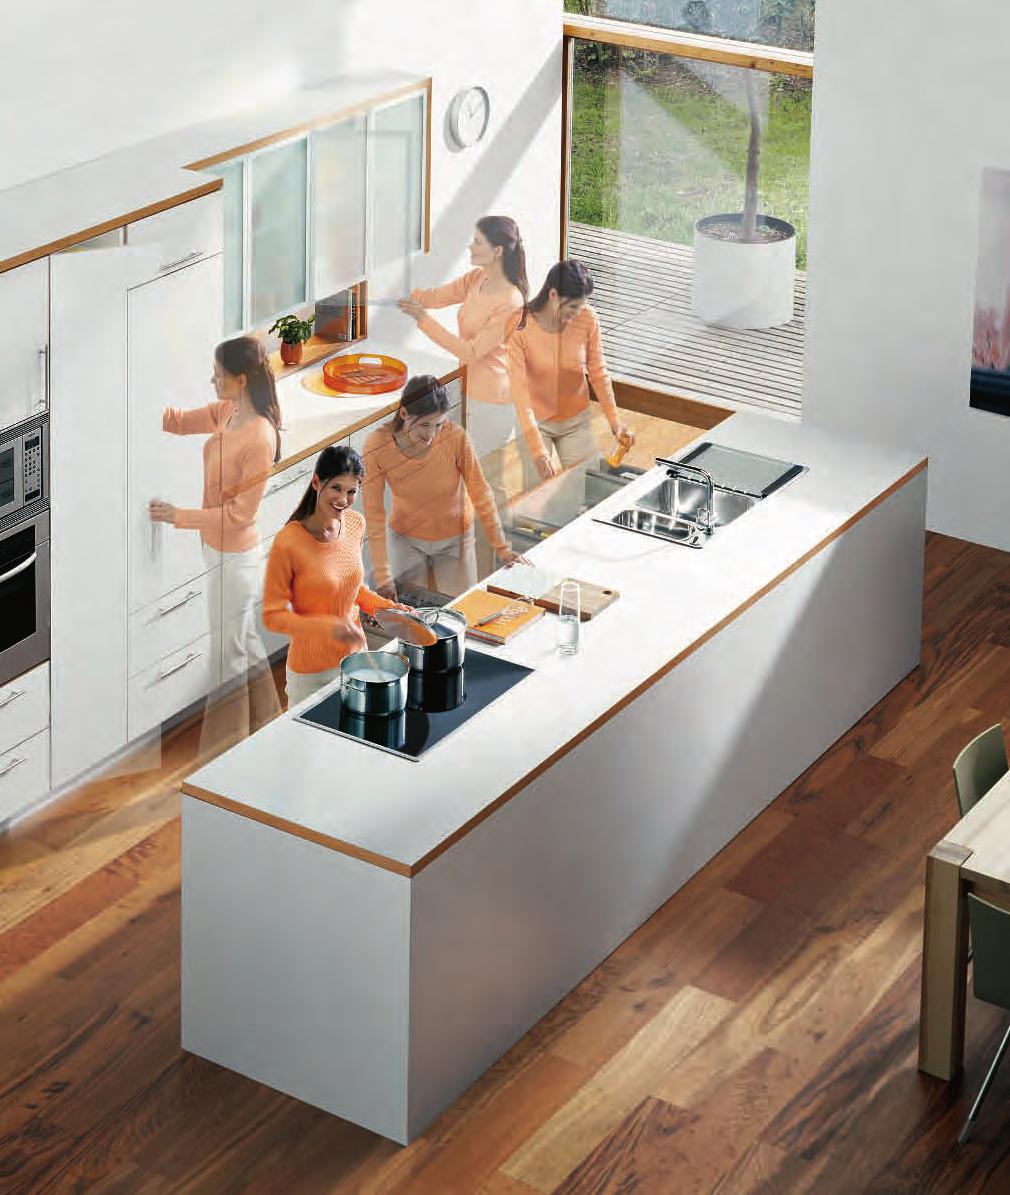 www.dynamicspace.com Time for essential values Set new standards for working in your kitchen.